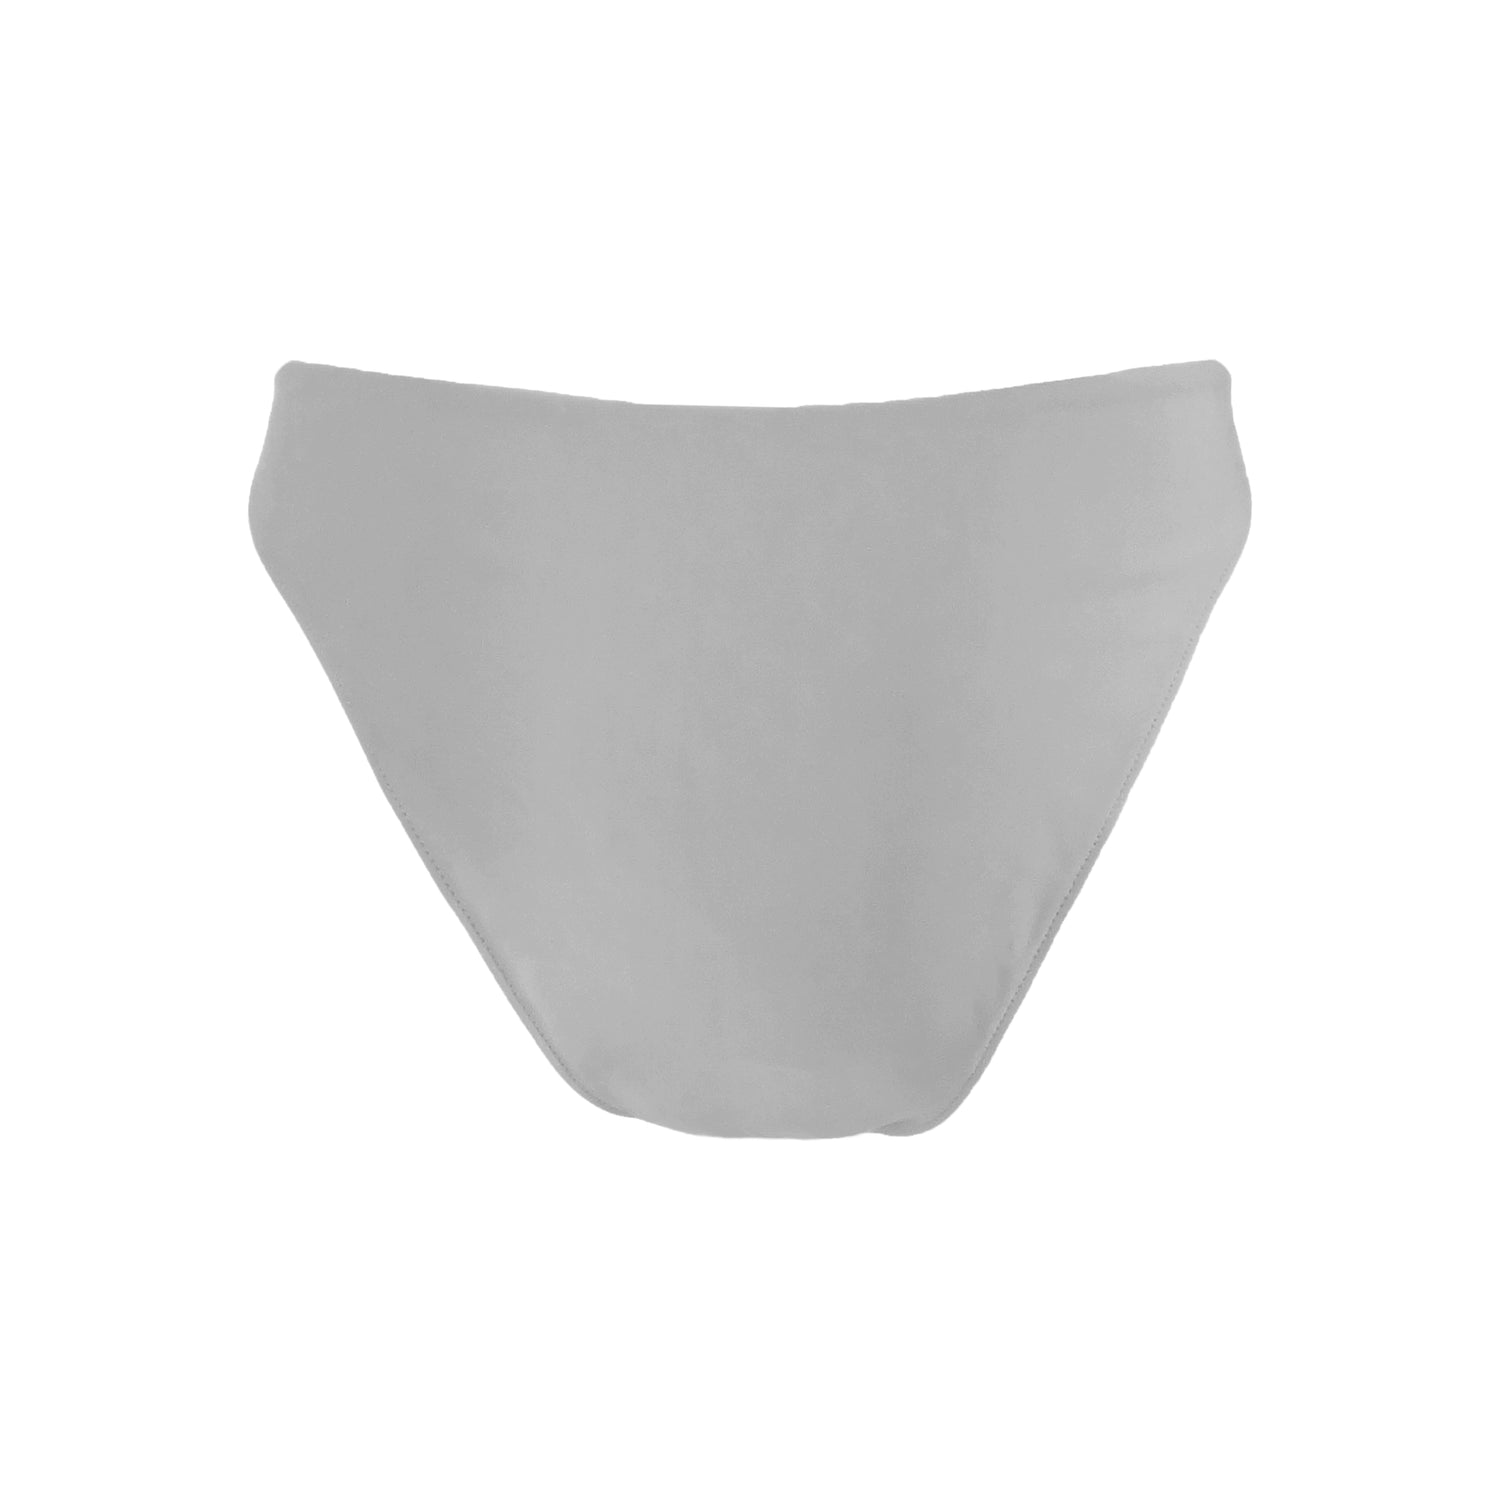 Back view of light grey v shape mid rise bikini bottom with asymmetric seam detail, high cut sides and cheeky bum coverage.